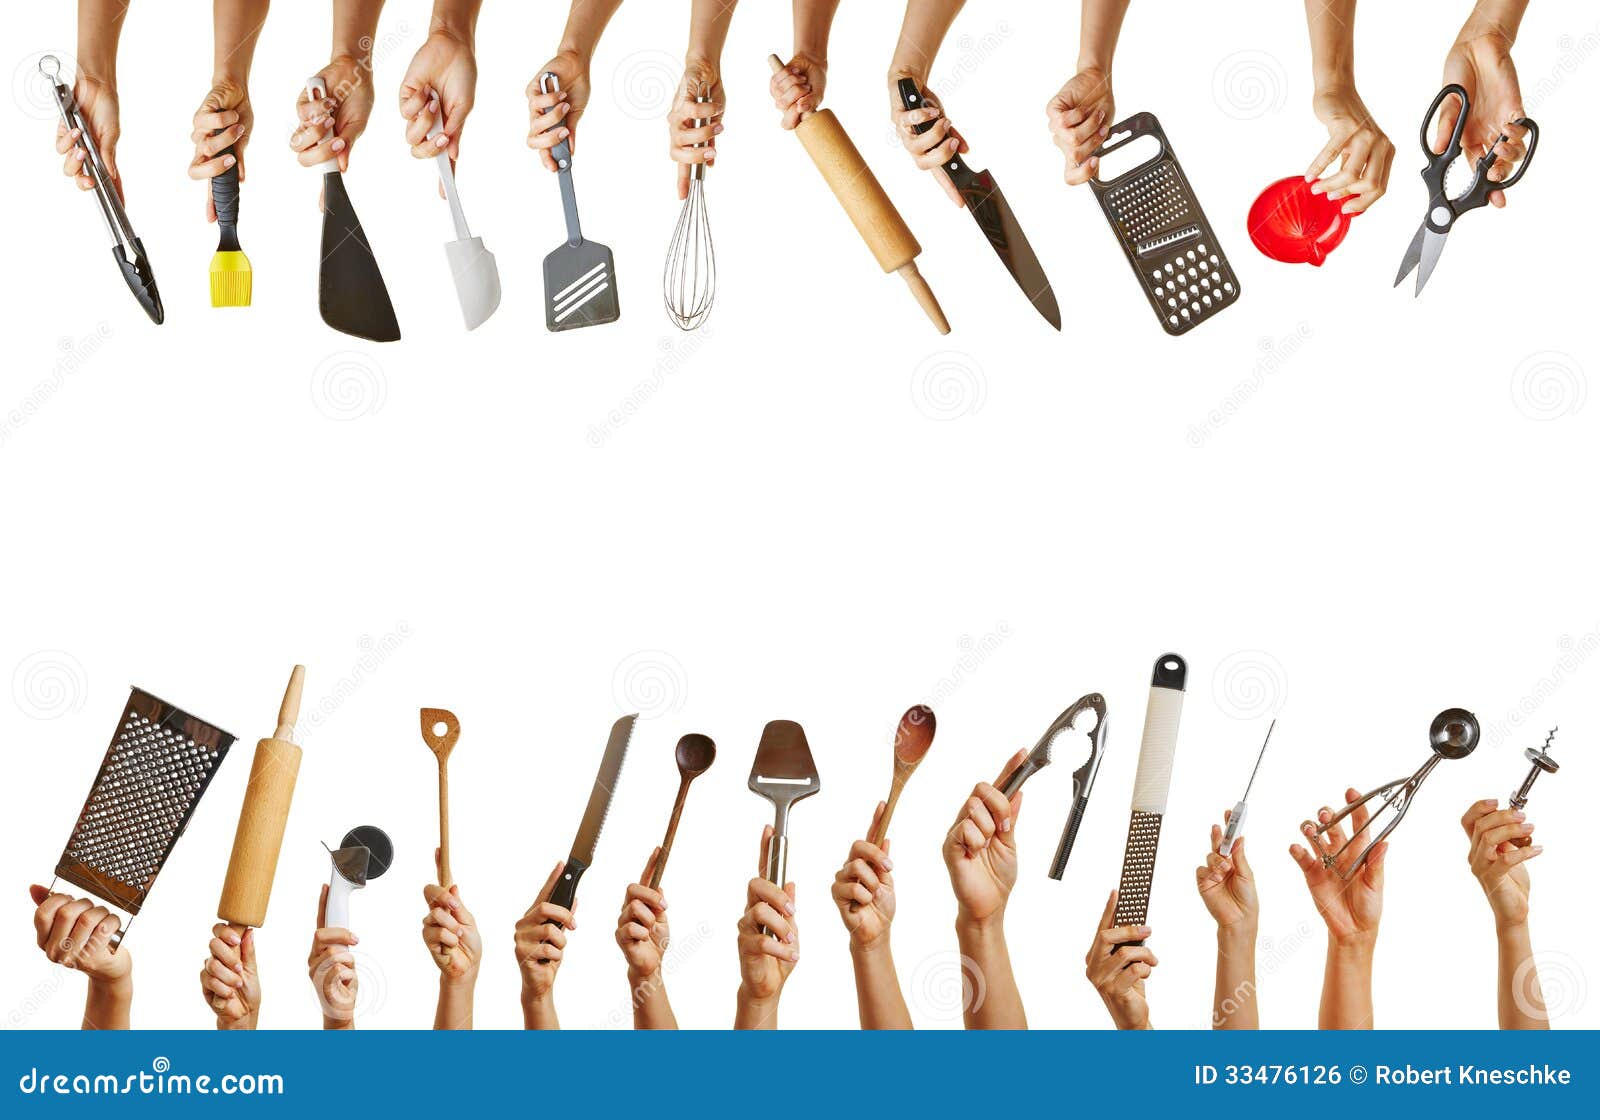 Many Hands Holding Different Kitchen Tools By Robert Kneschke Via Dreamstime Kitchen Tools Kitchen Hold On